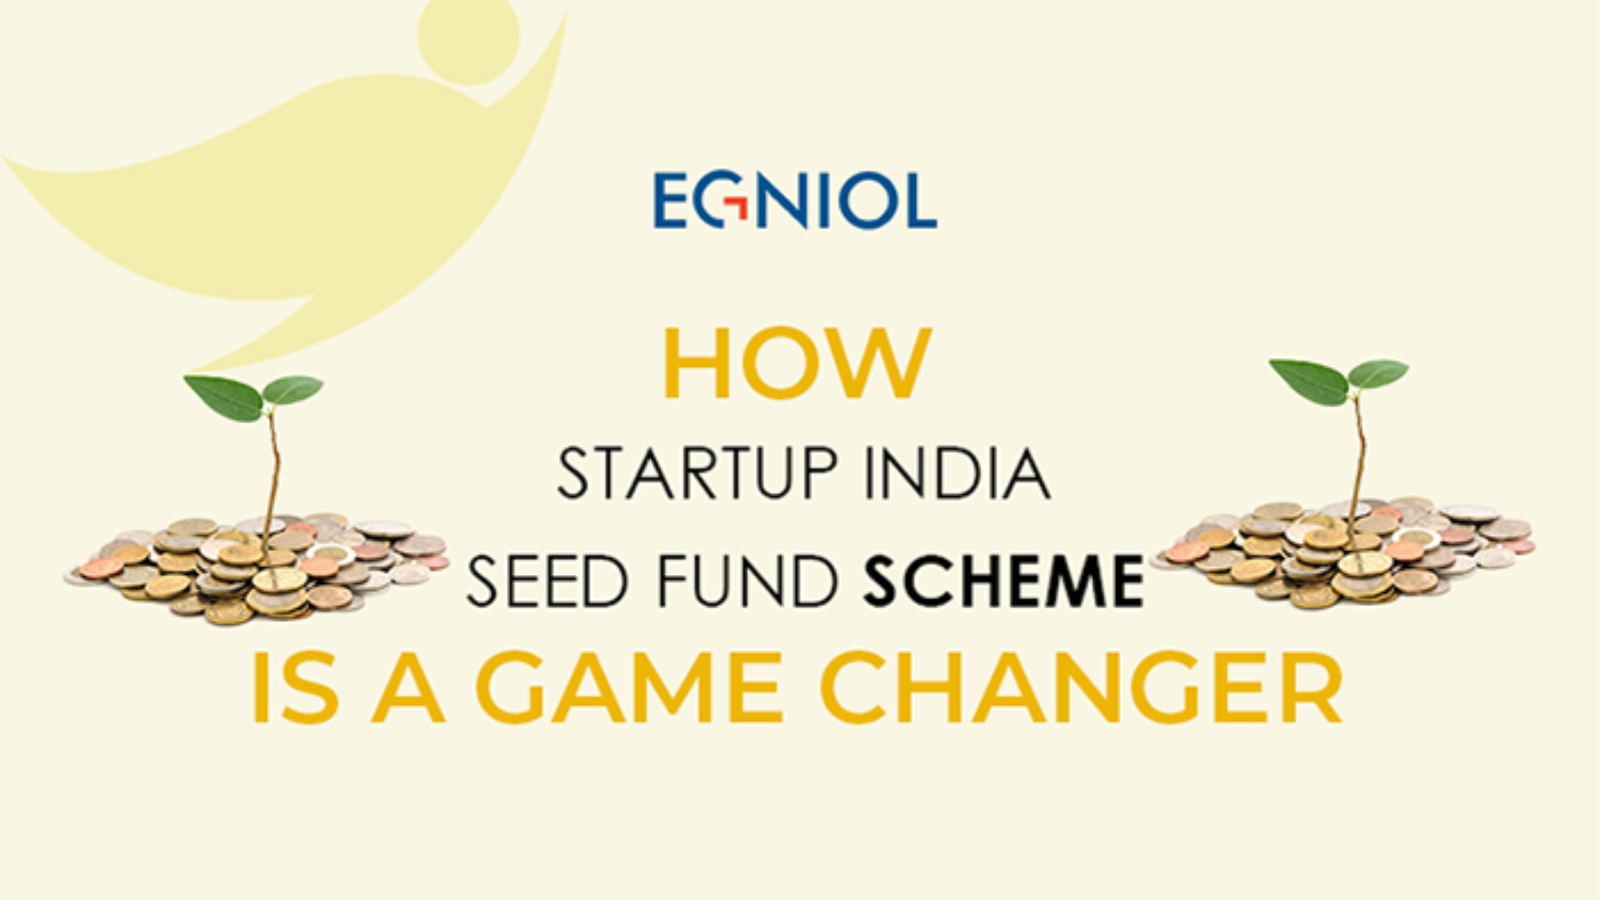 How Start-up India Seed Fund Scheme is a Game Changer - By Egniol